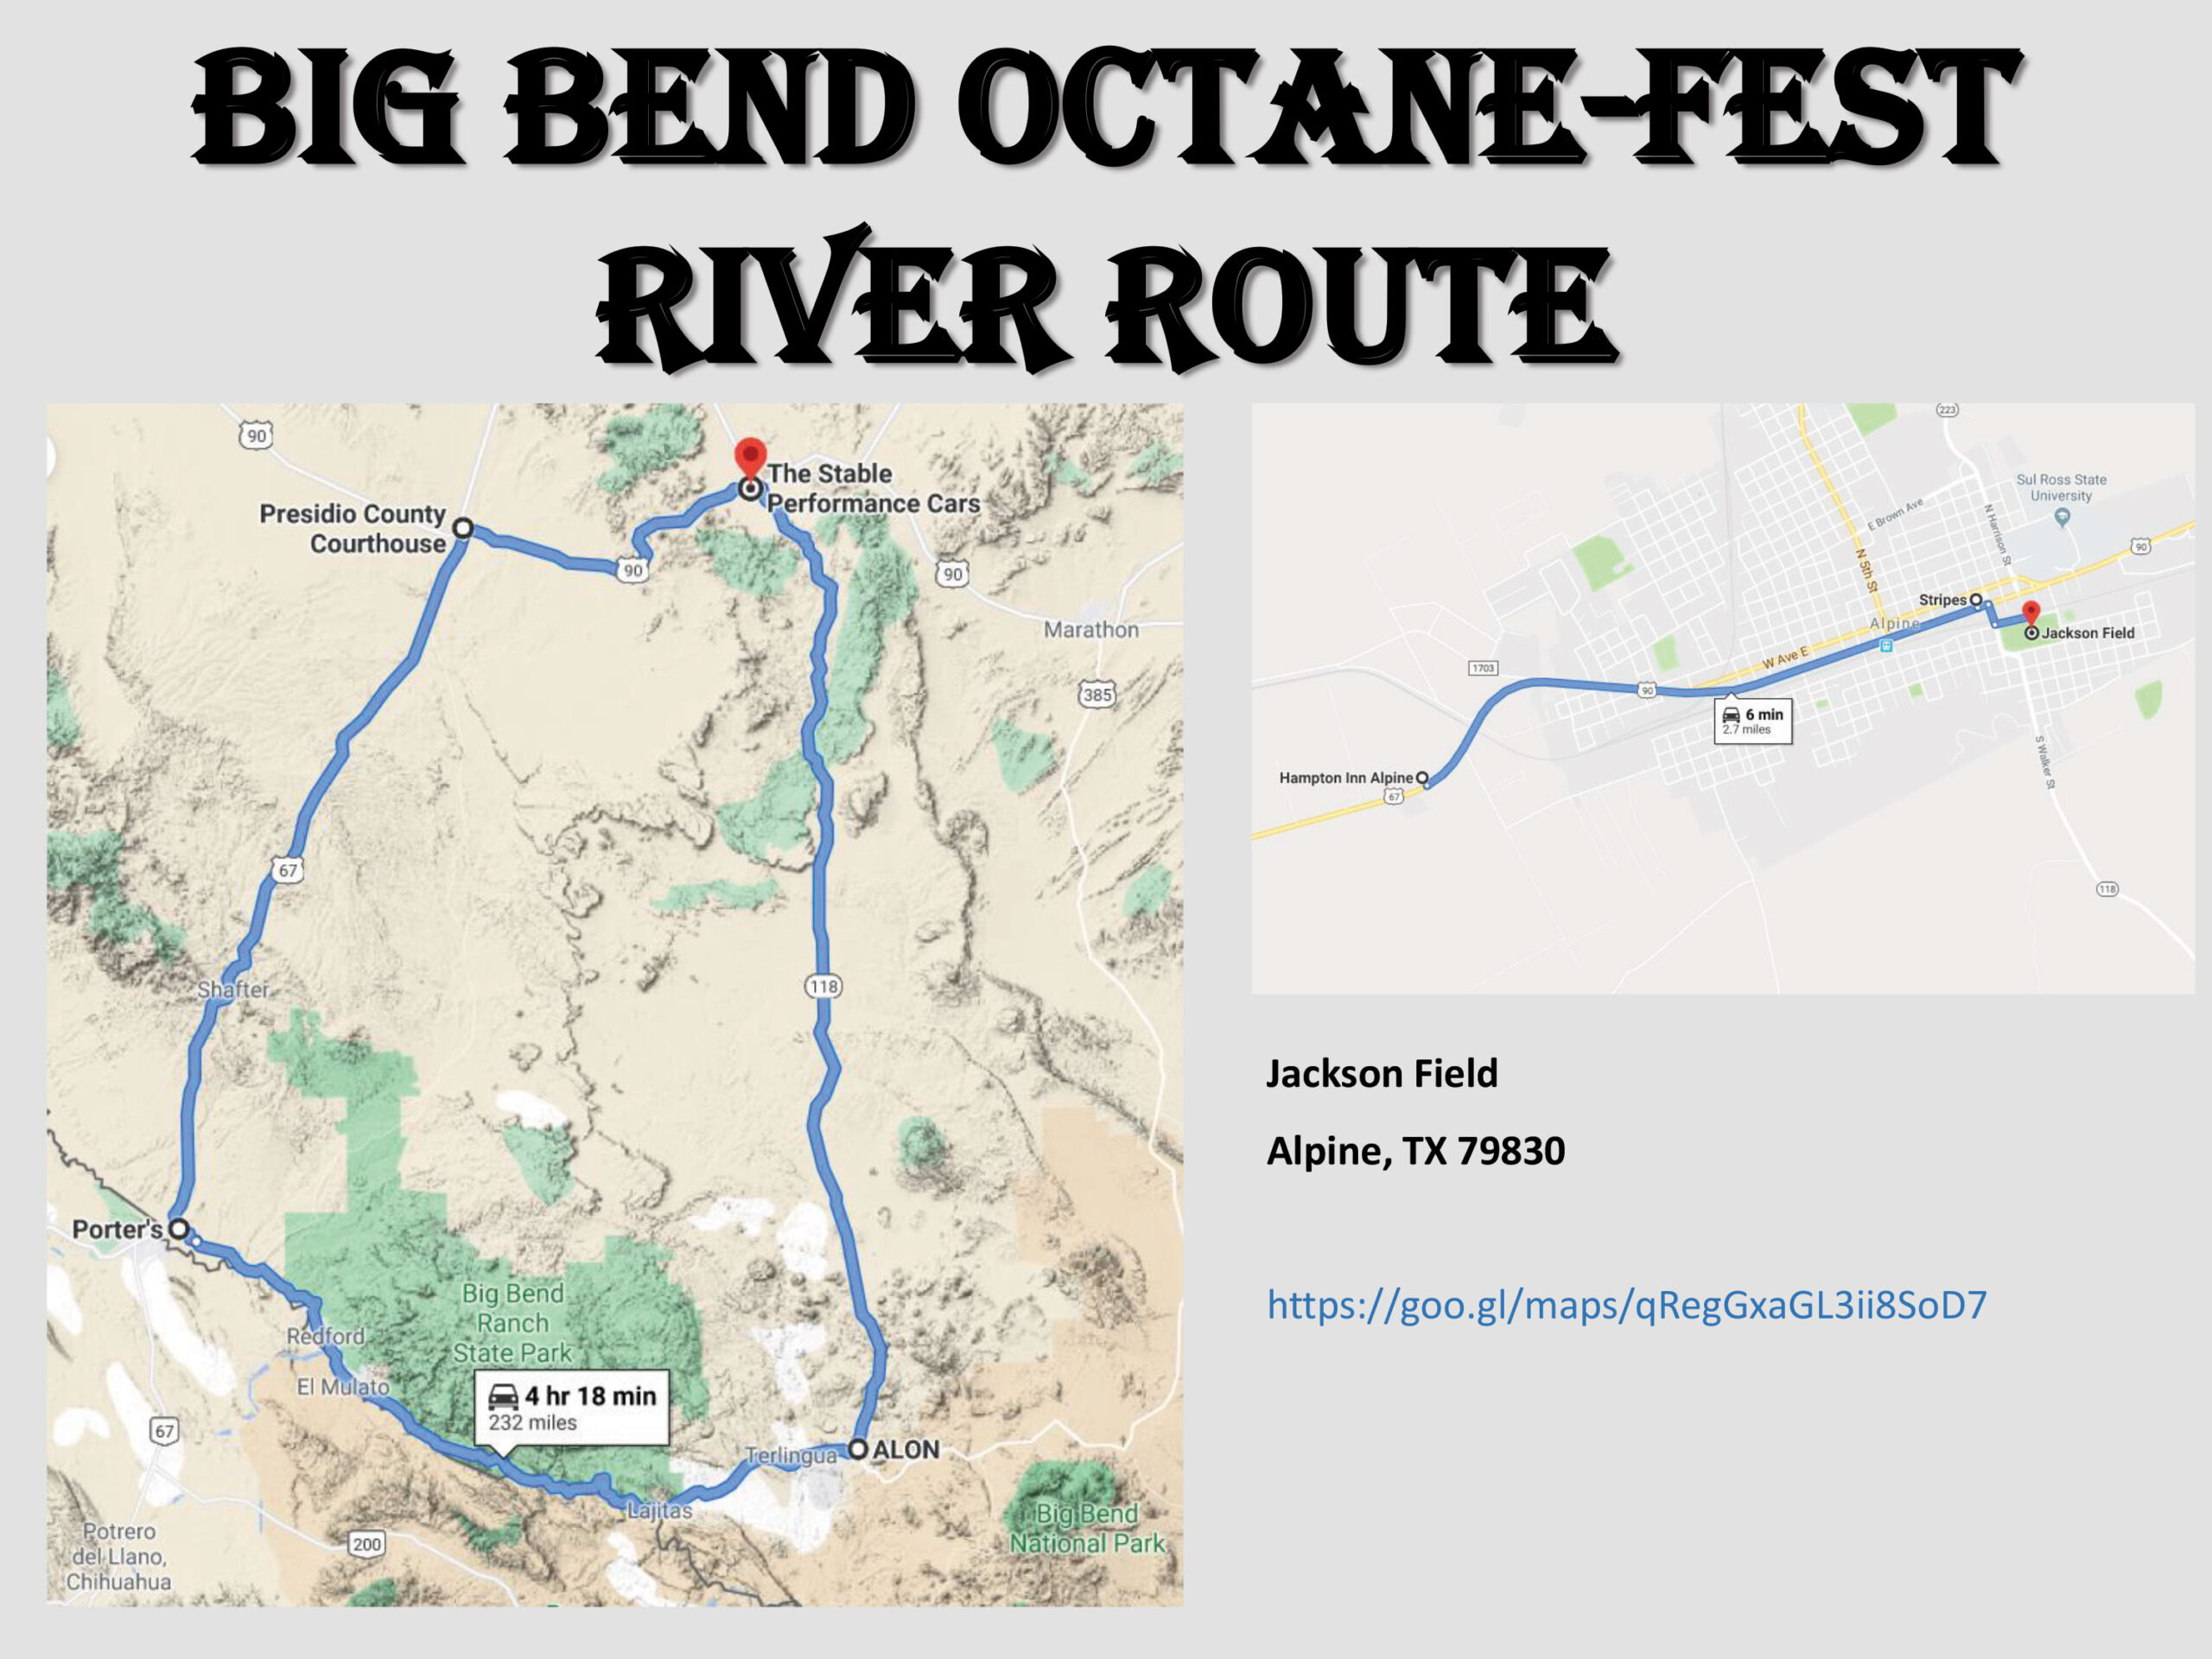 Map of the Big Bend Octane Fest River Route.